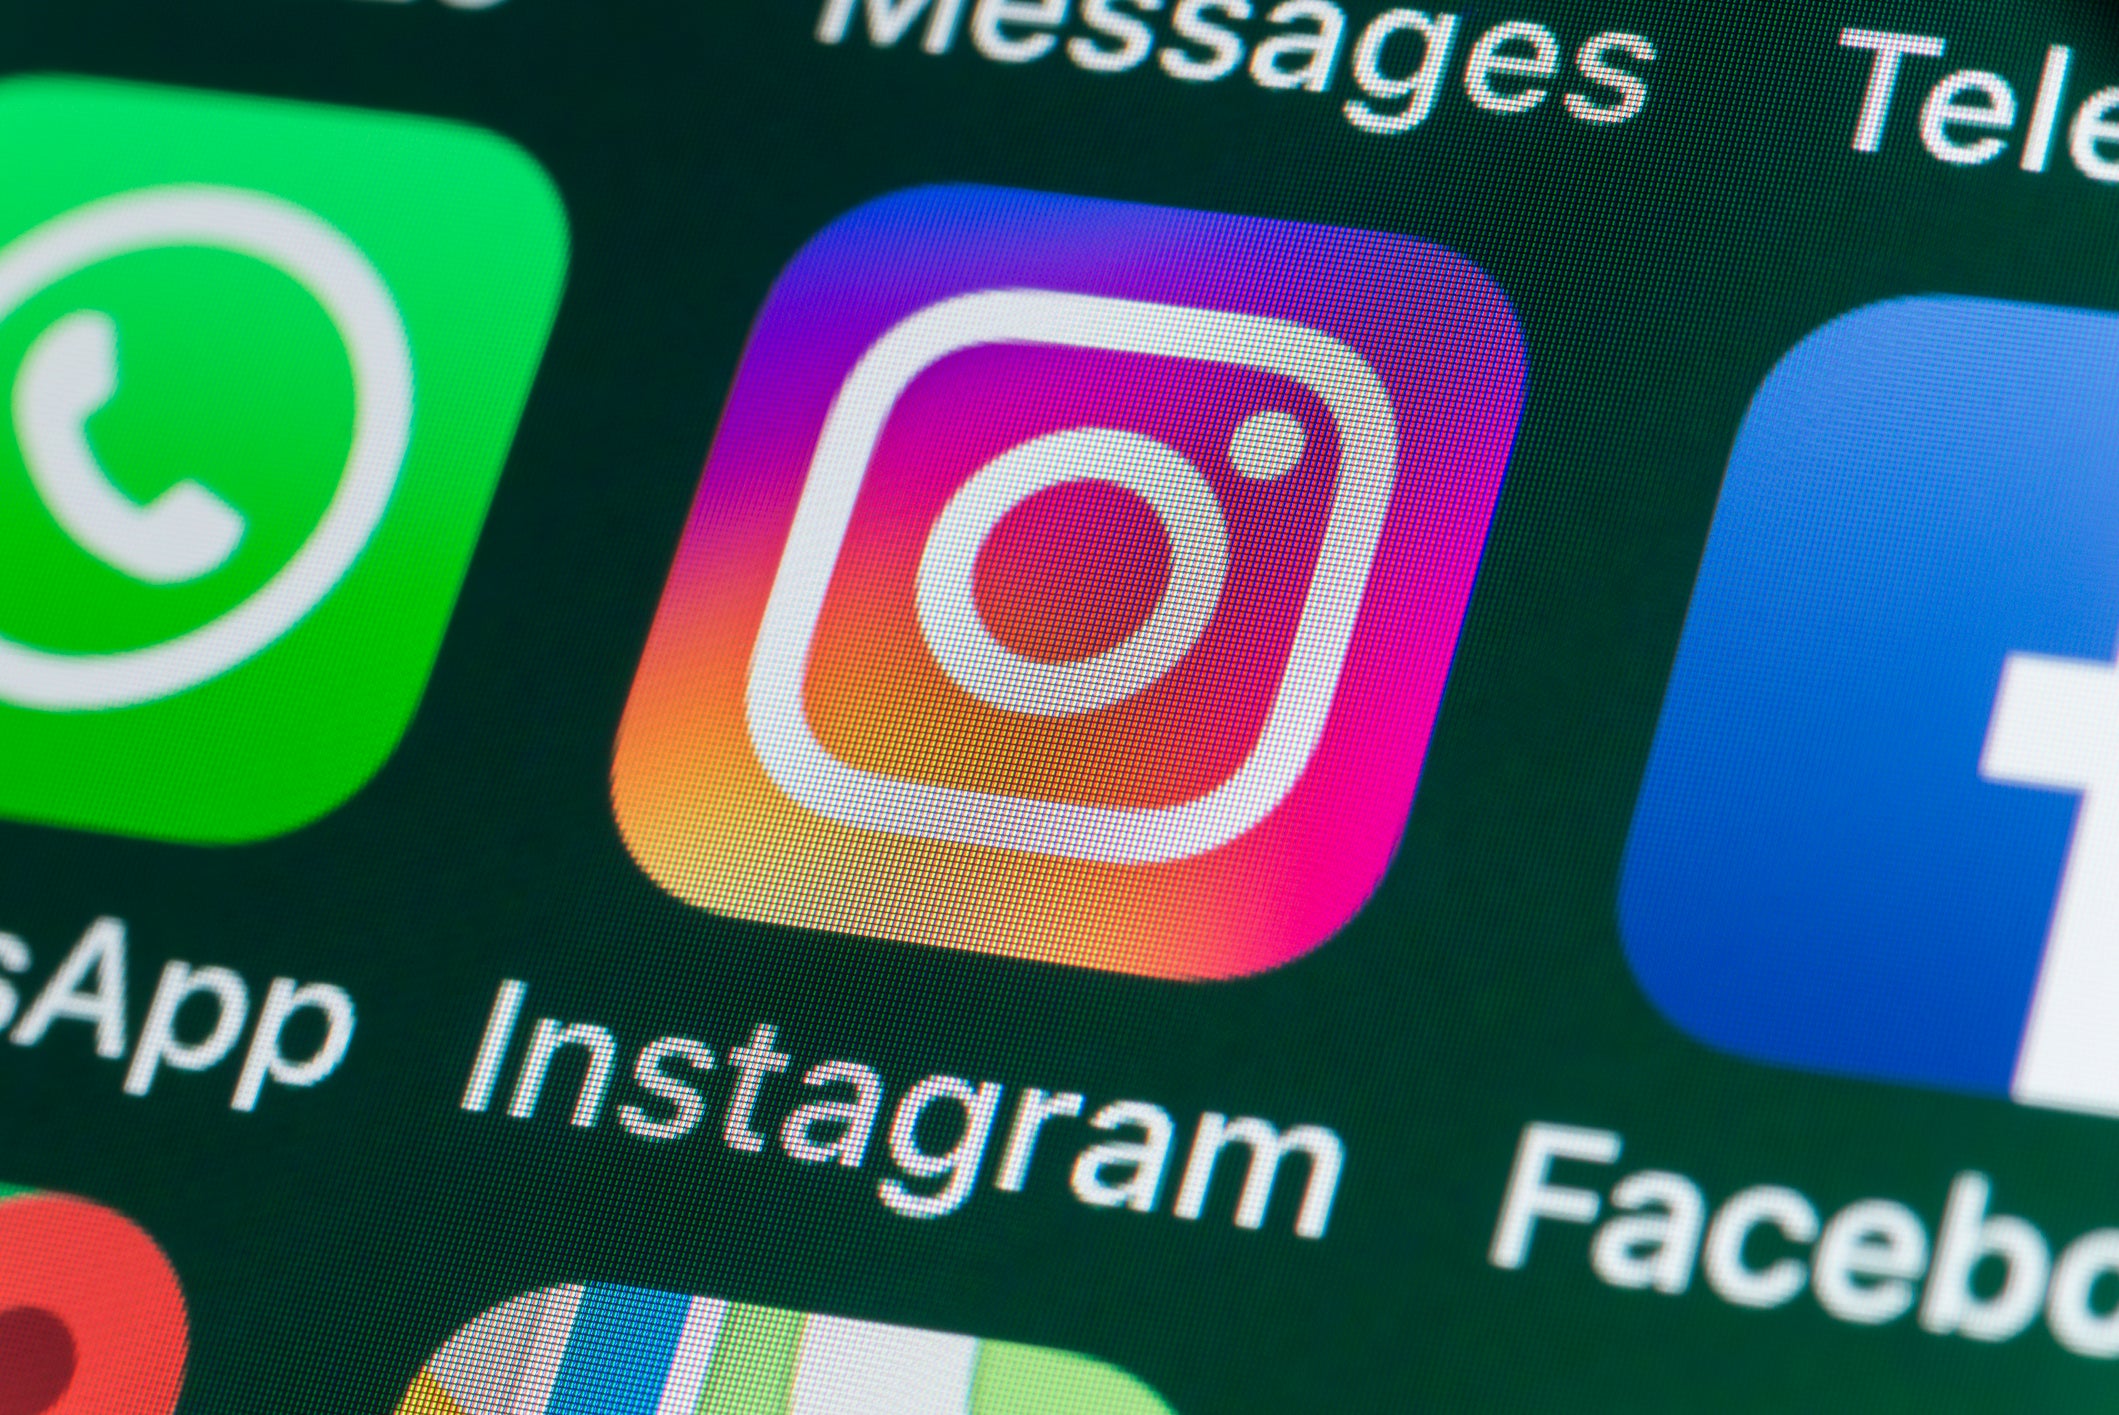 Researchers warned of an ‘epidemic of misogynist abuse’ sent through Instagram direct messages